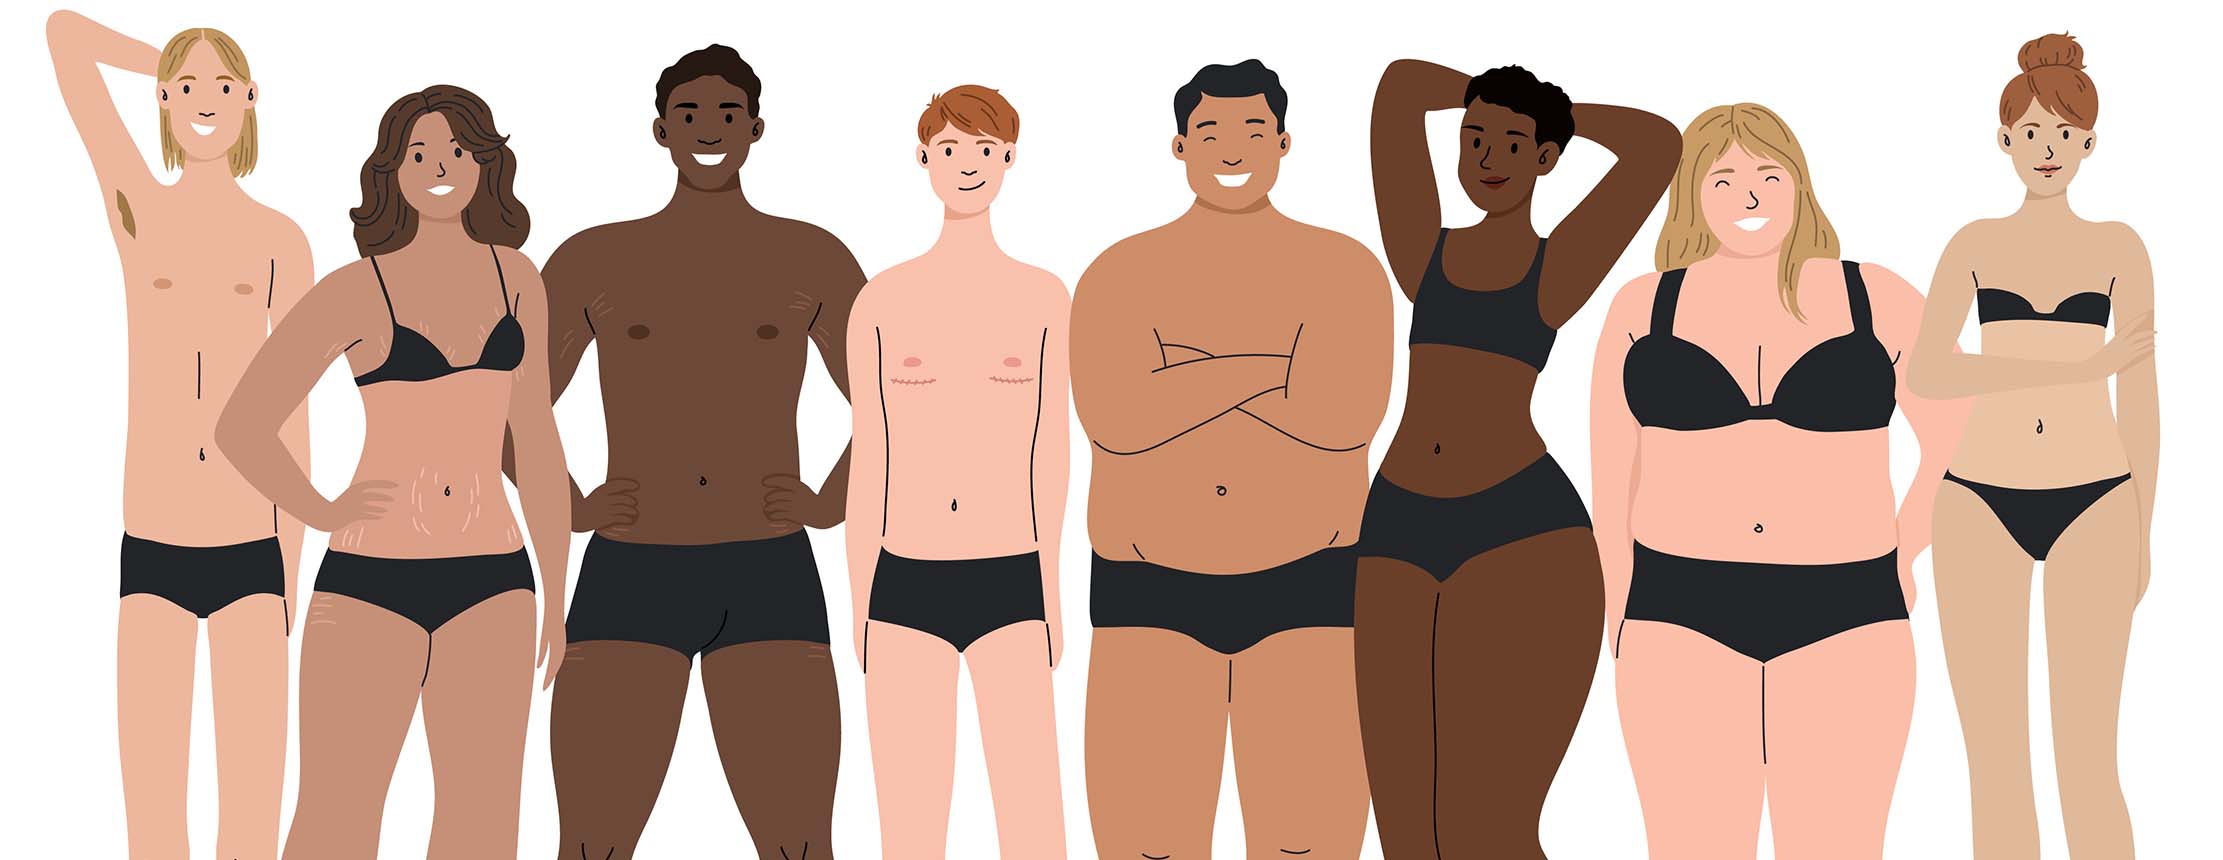 Diverse group of people of different nationalities and body types standing and smiling on a white background